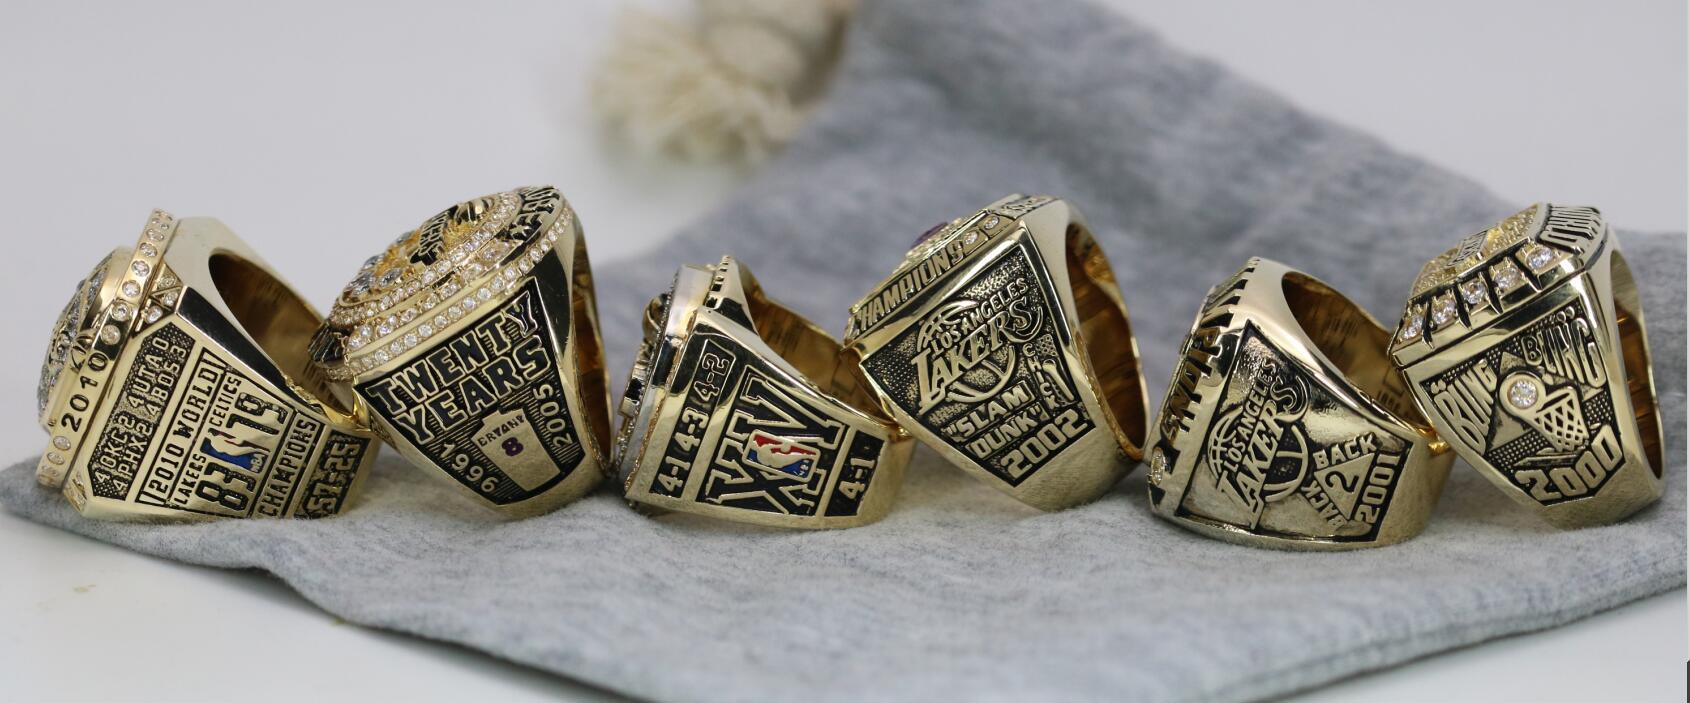 2000 Los Angeles Lakers NBA Championship Ring – Best Championship